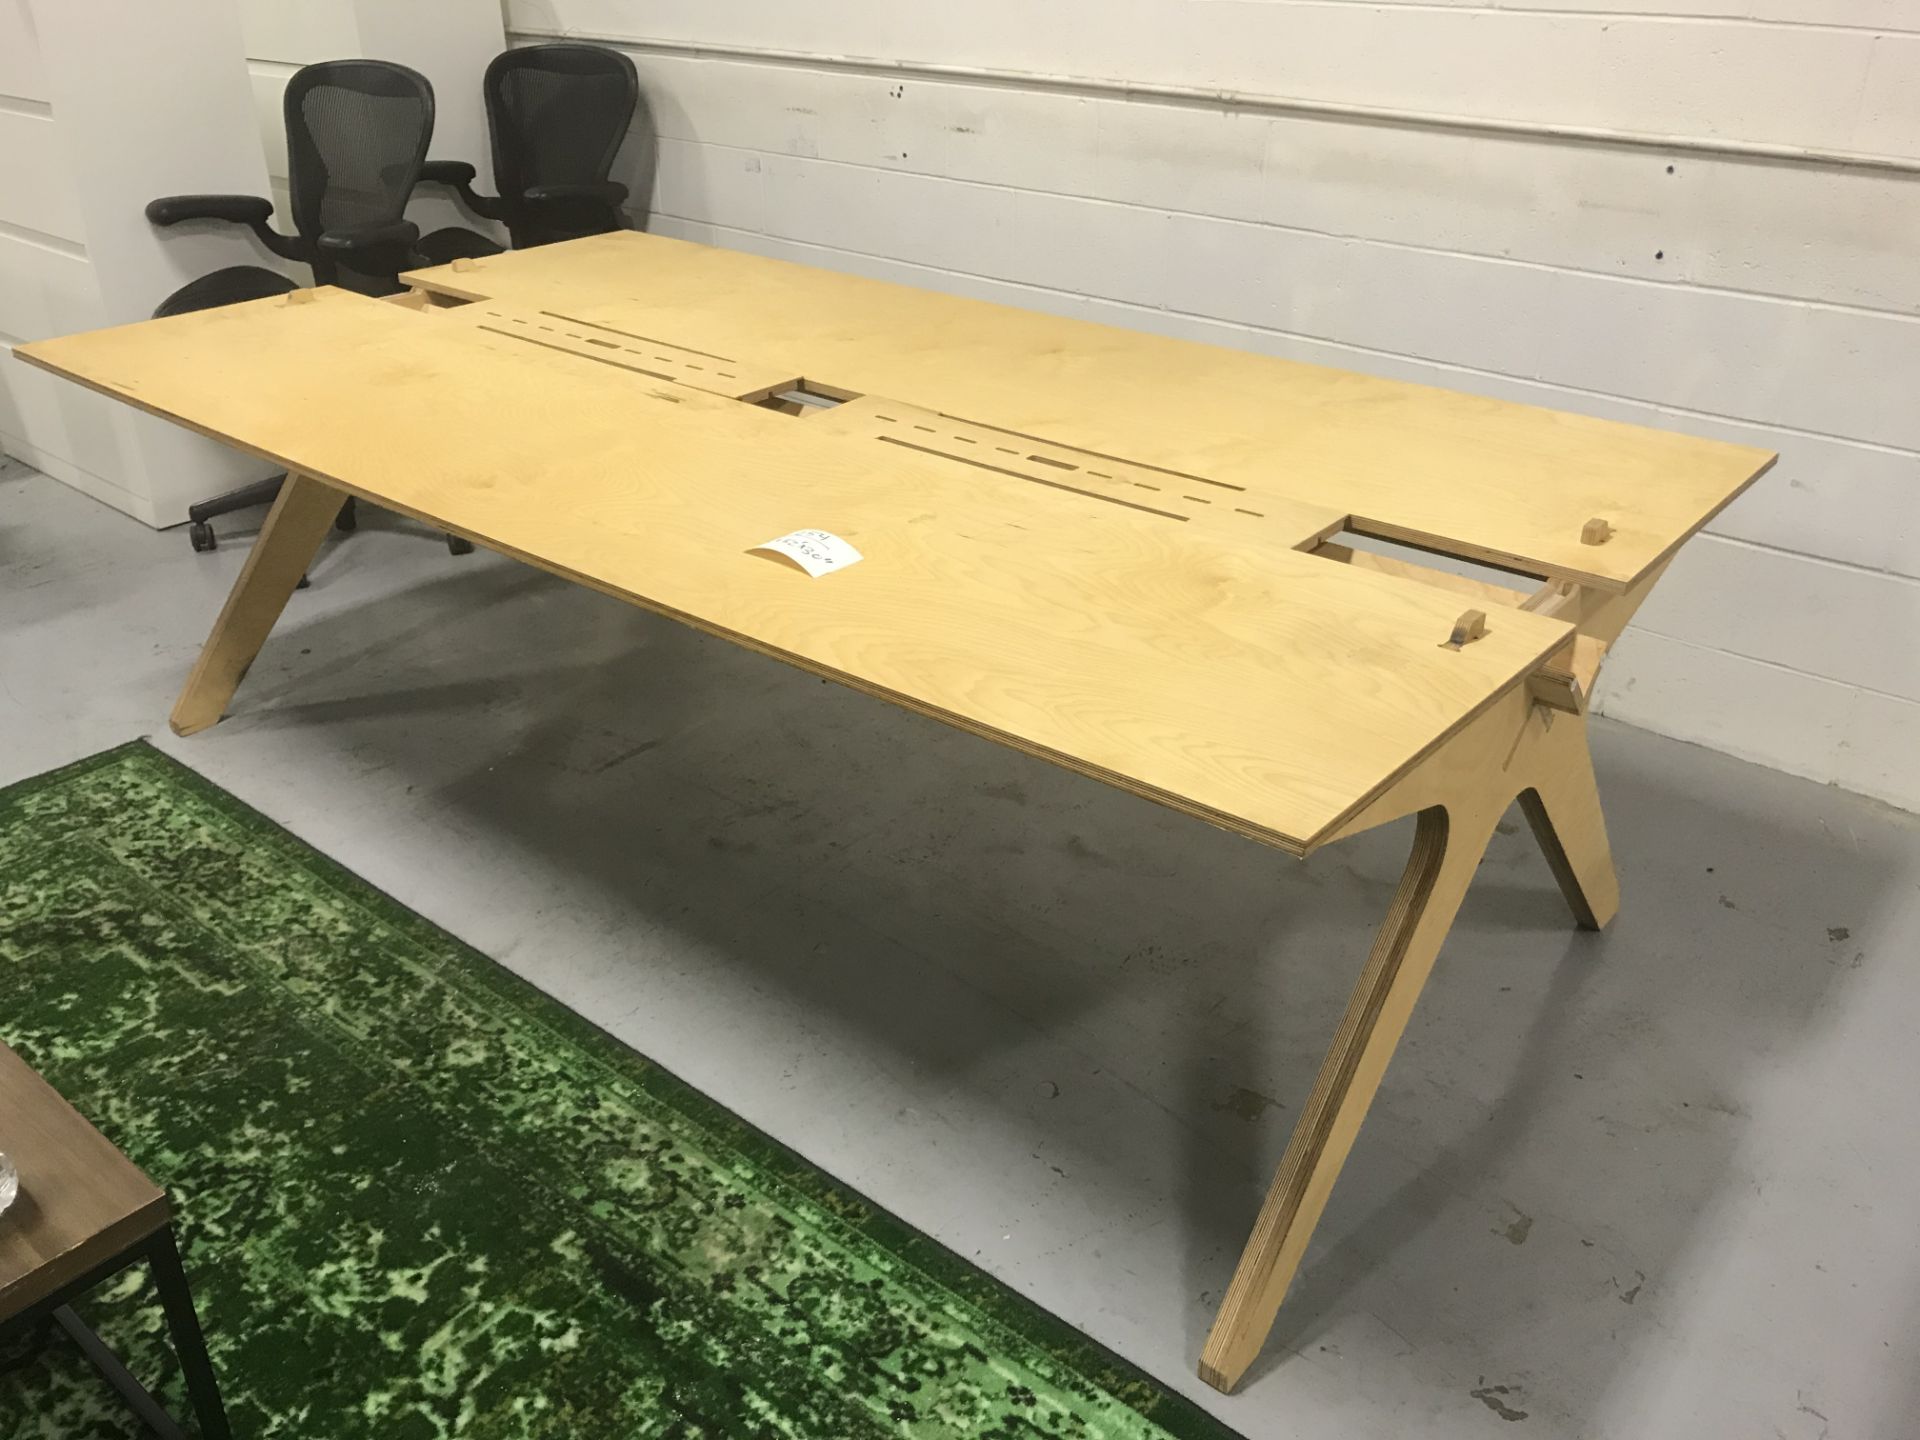 All Wood Conference Table/Platform Table (Bungs) w/ Open Middle Area 8'L x 52"W 30"H - Image 3 of 3